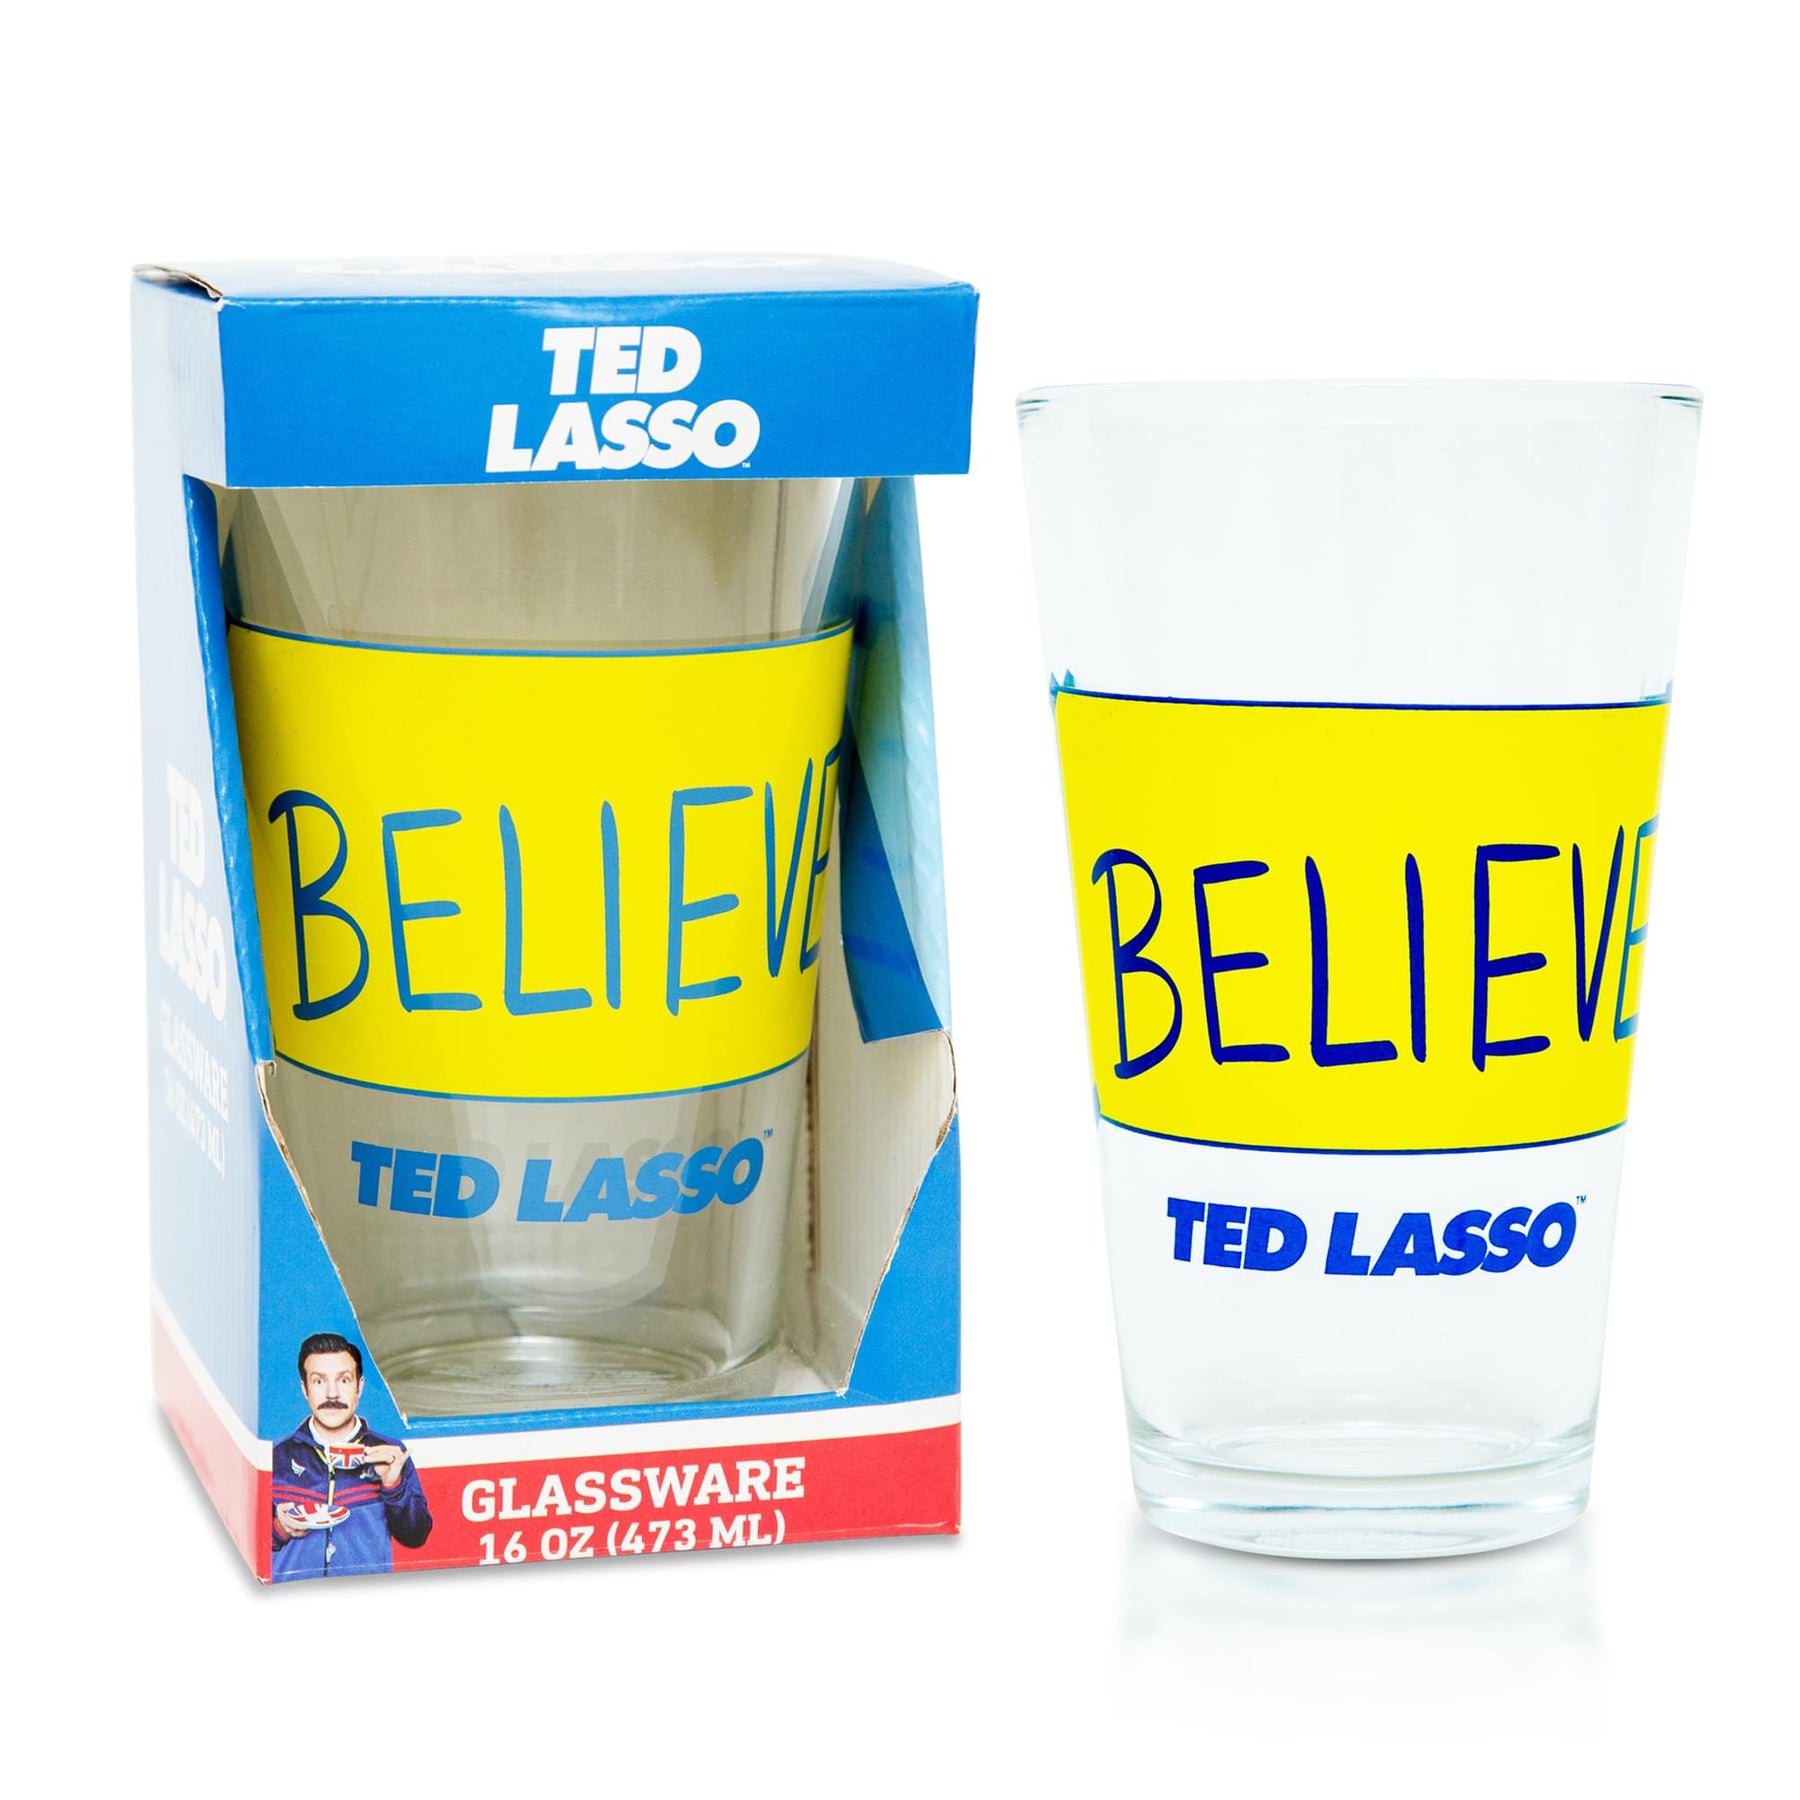 Ted Lasso "Believe" Pint Glass | Holds 16 Ounces